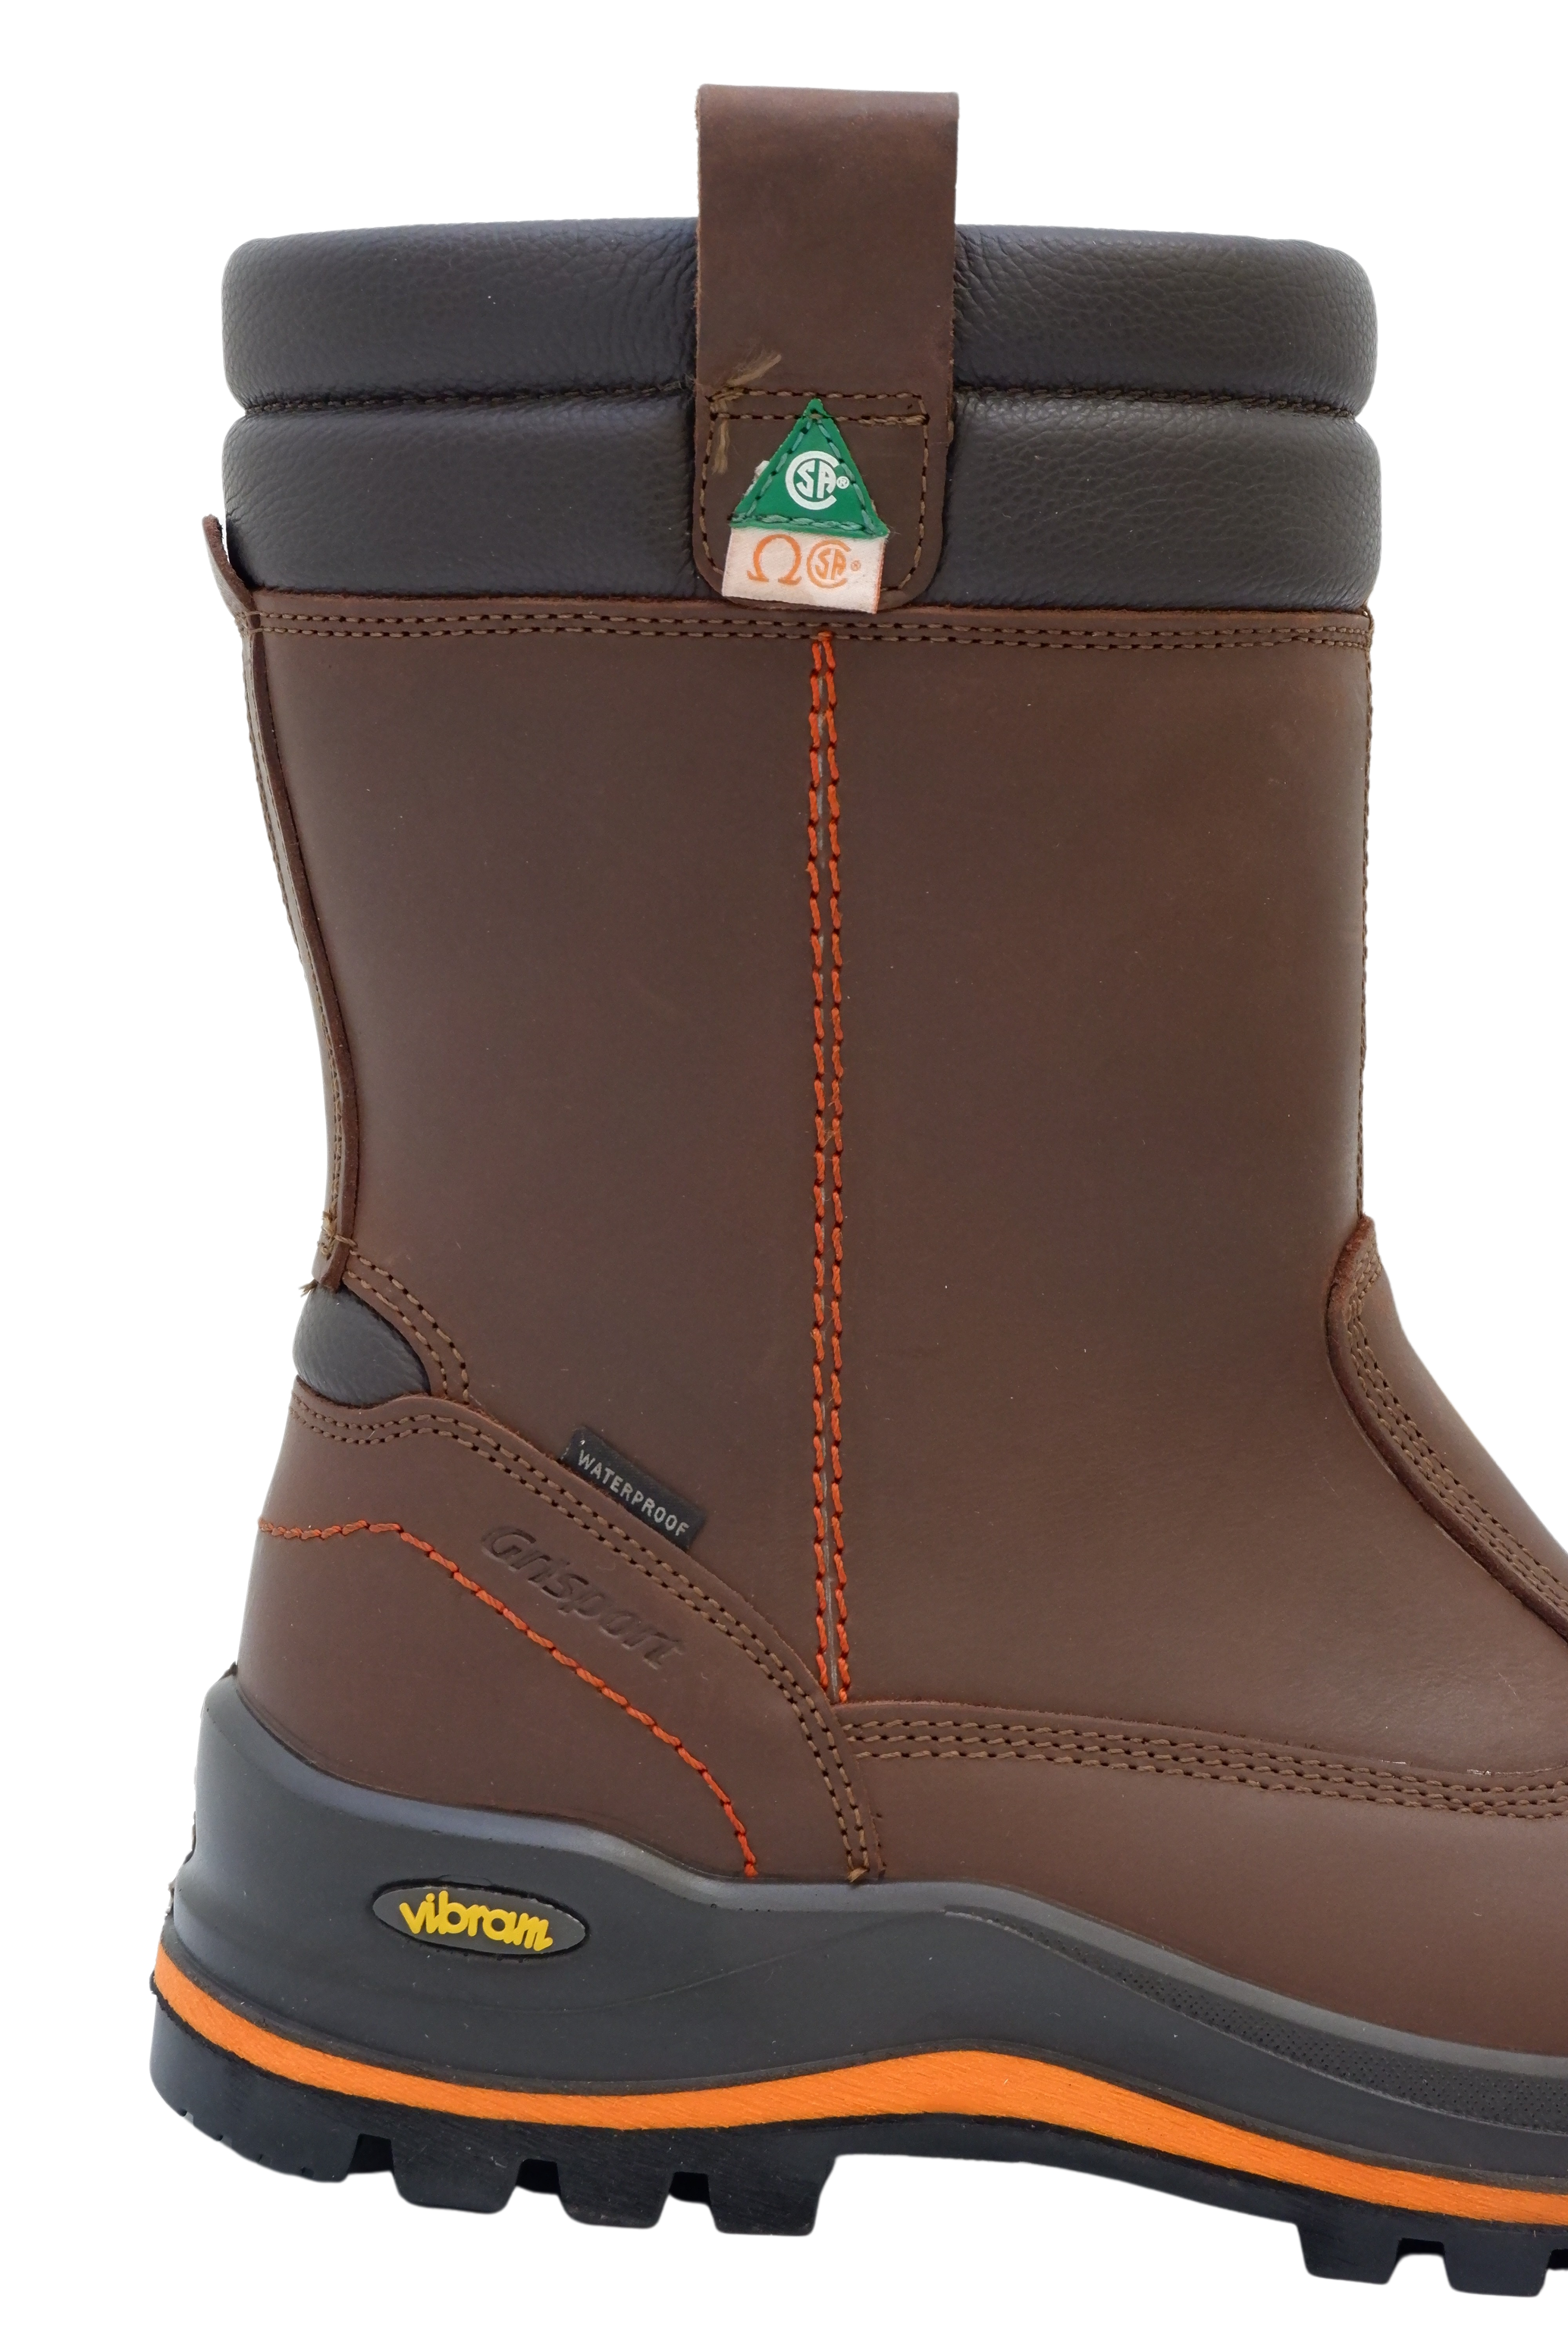 Grisport Men's Winter Safety Boots Moose Pull-On Leather Waterproof with Vibram® Megagrip Pro Sole Sizes 7-14